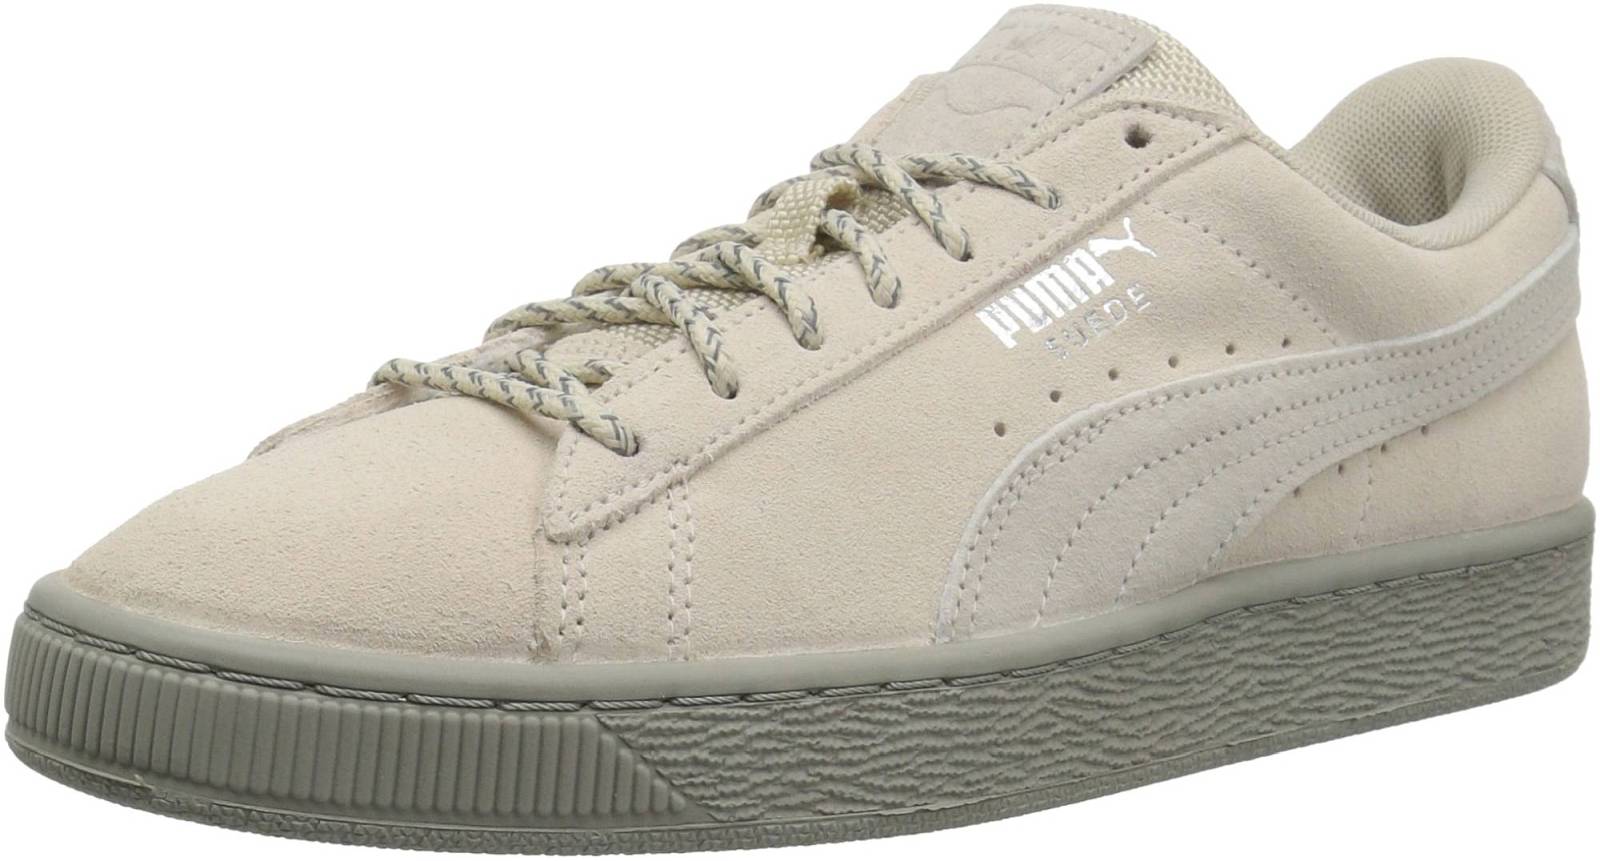 Puma Suede Classic Weatherproof – Shoes Reviews & Reasons To Buy